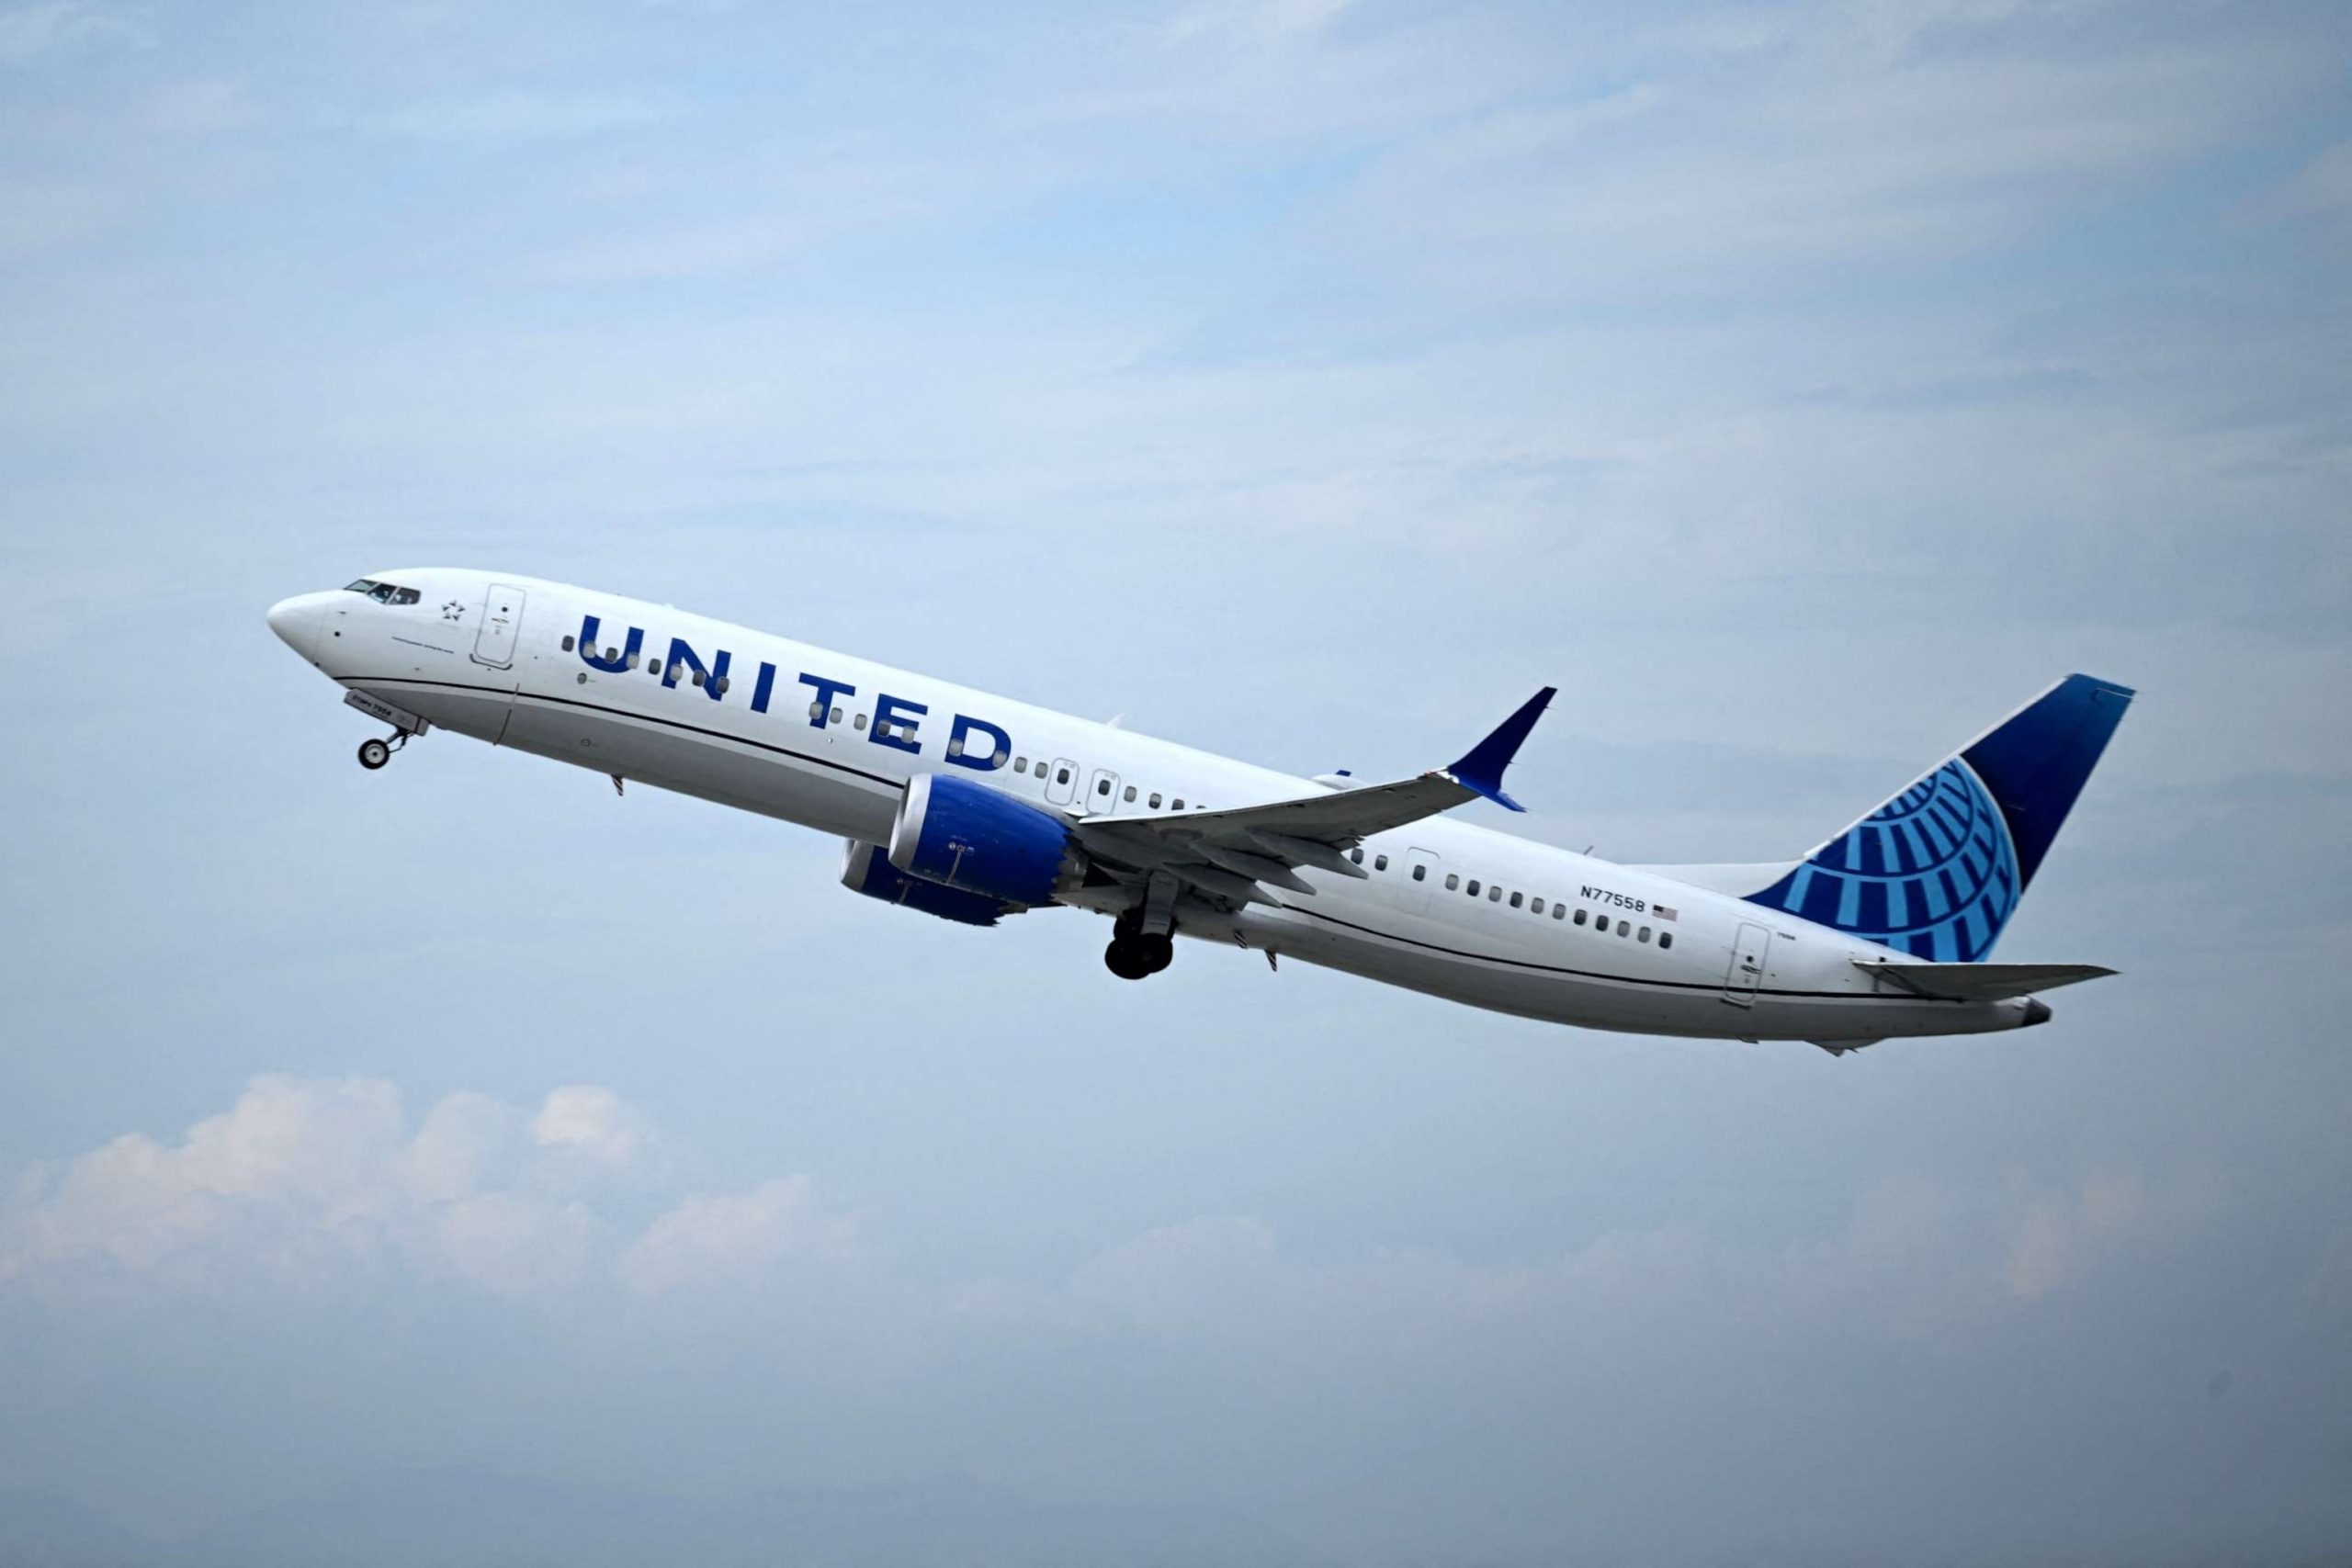 United Airlines Implements Window Seat Boarding Priority to Reduce Boarding Time by 2 Minutes